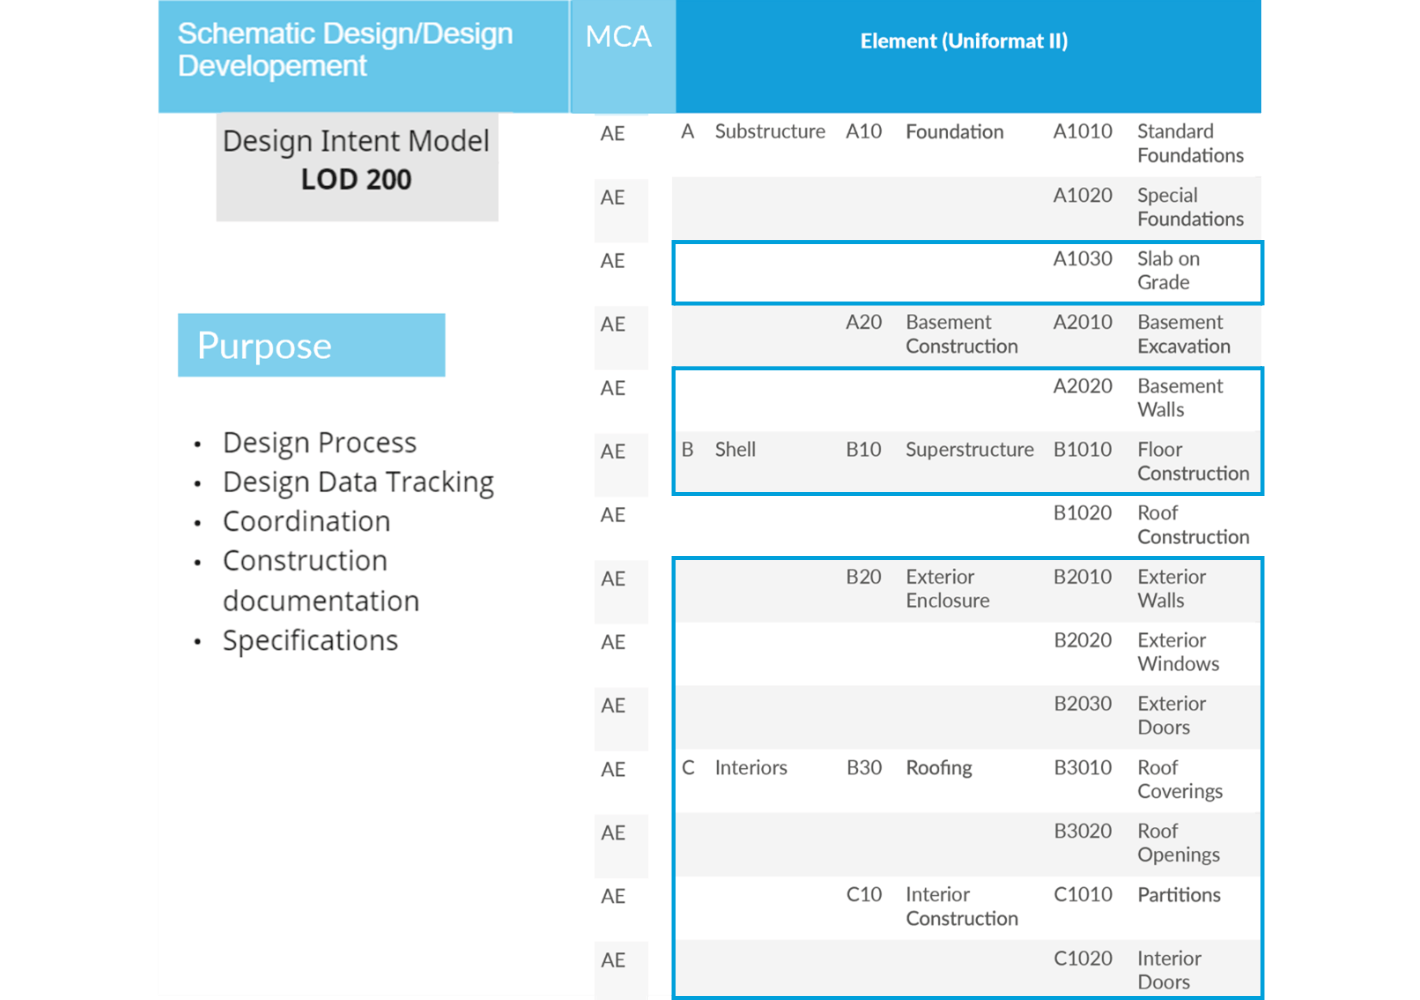 Table 1: LOD 200 Purpose in Schematic Design and Design Development Phases. Reference: National BIM Standard, version 3.0, 2015